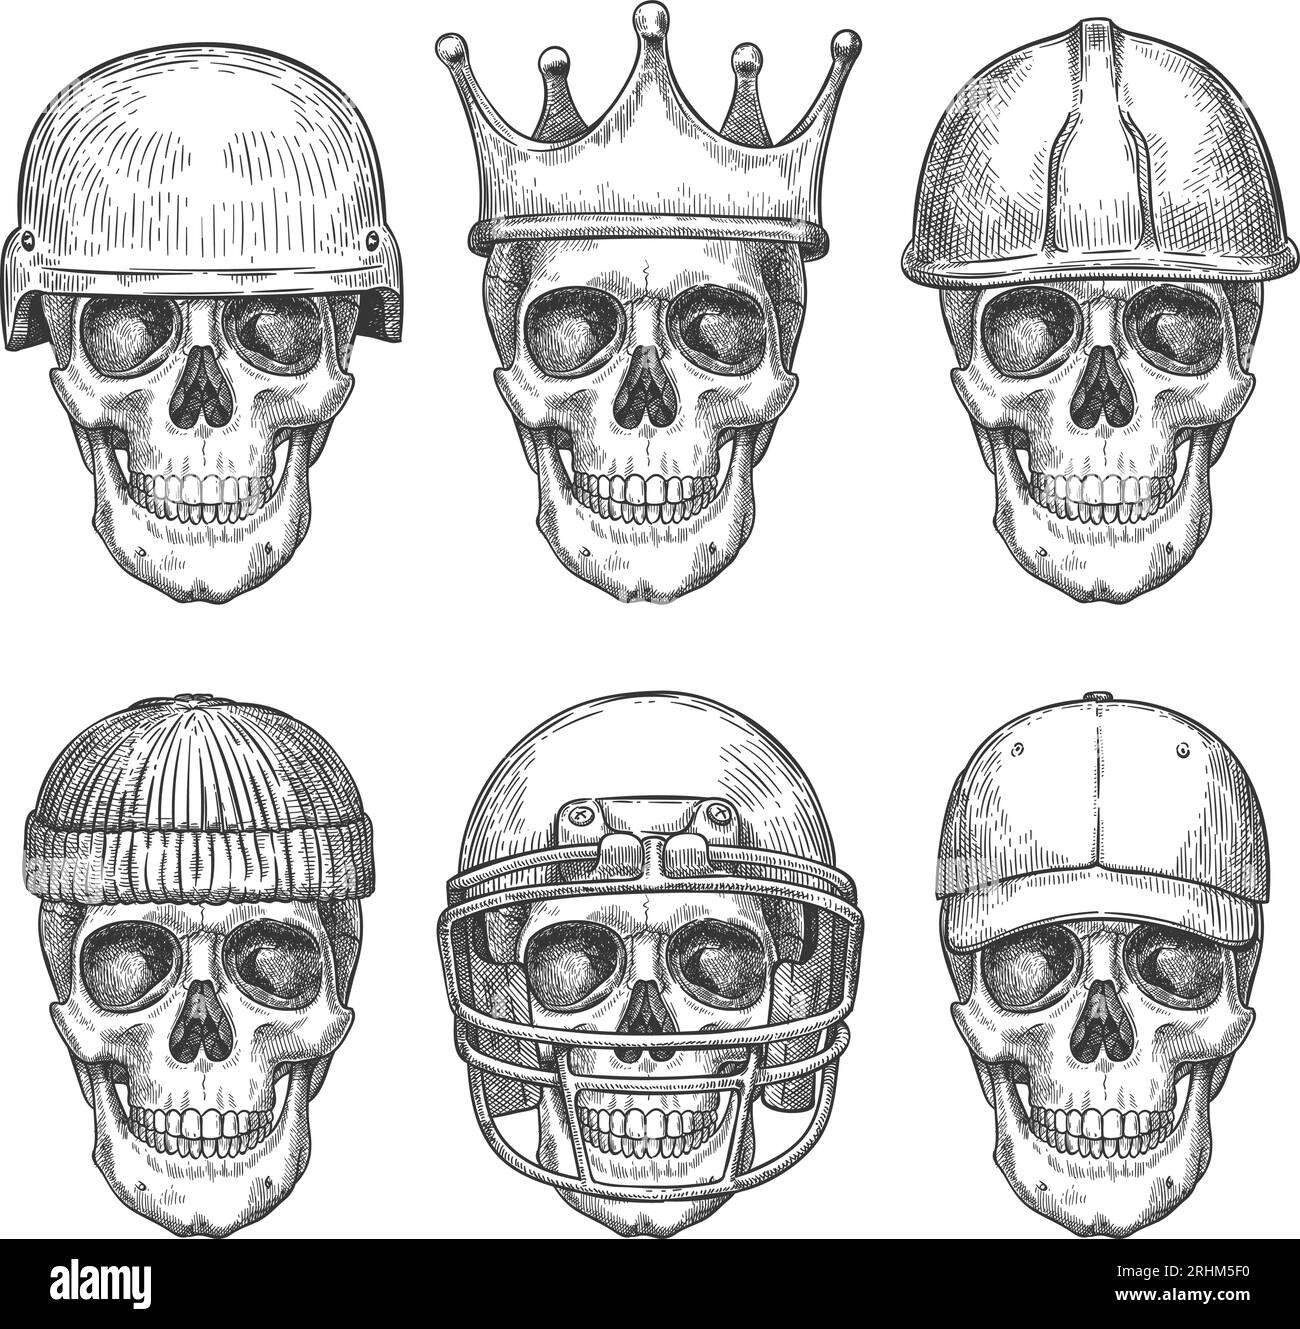 Skull in hats. Dead head characters with crown, baseball cap and ...